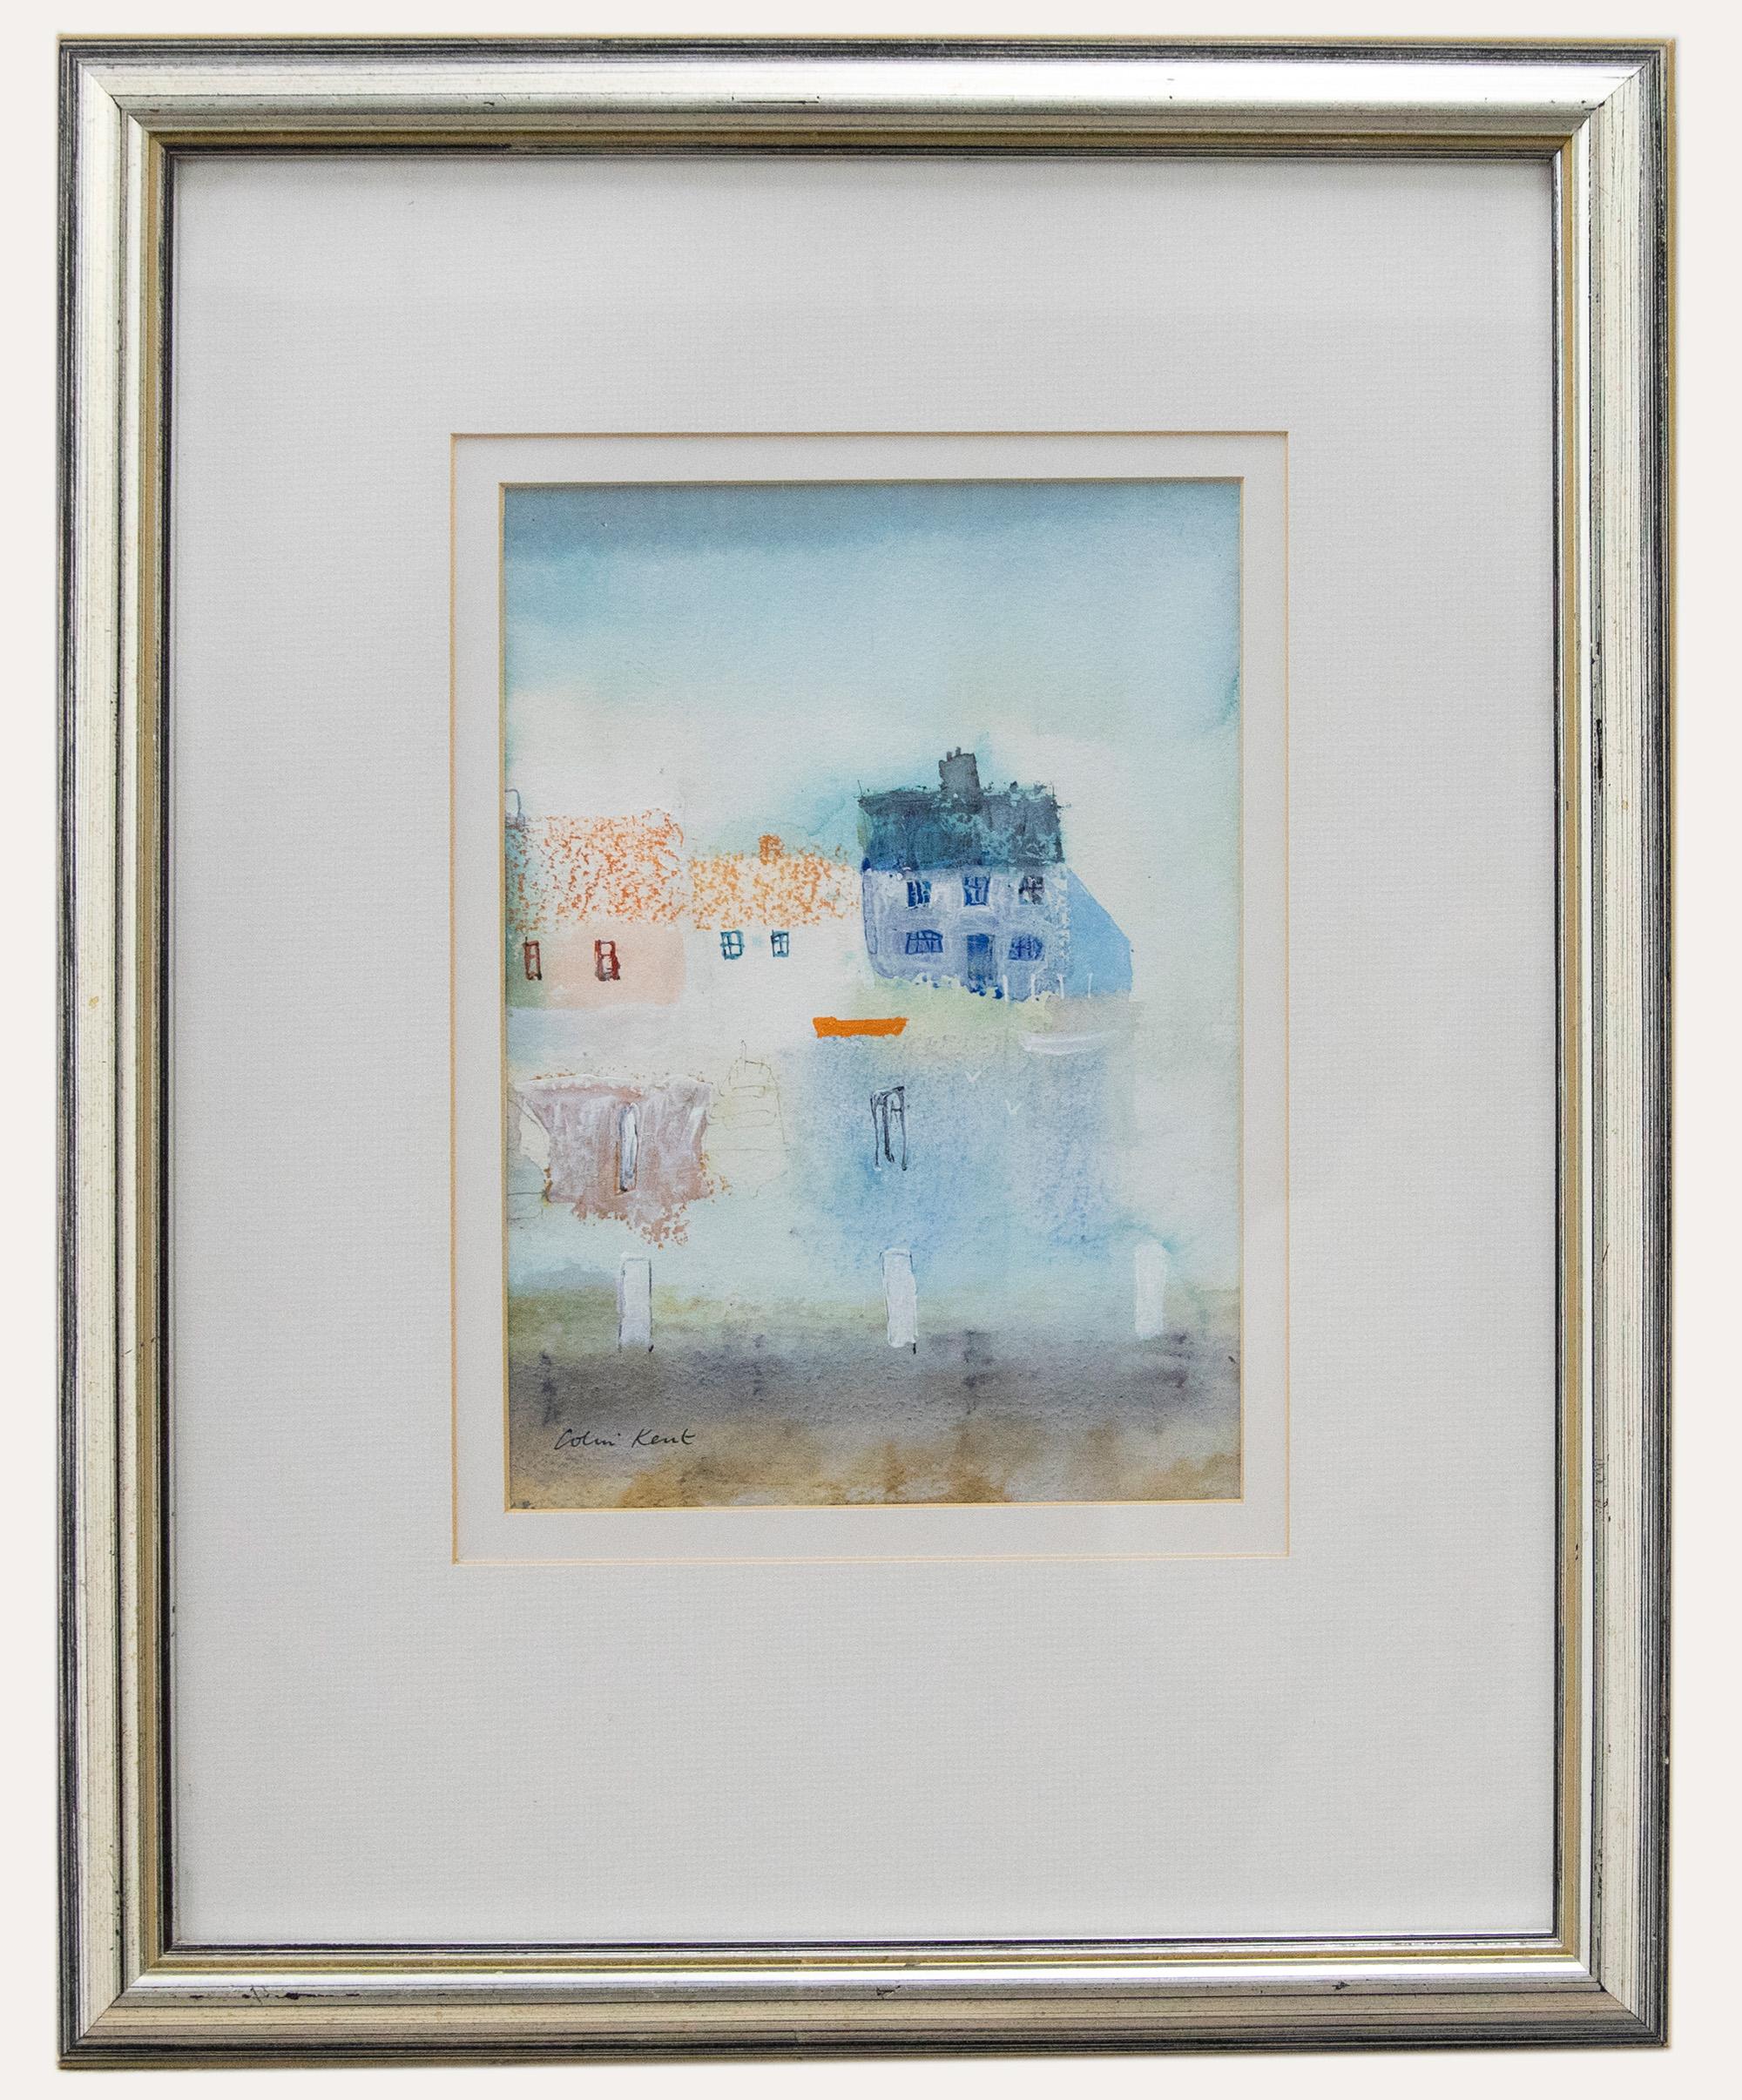 Colin Kent RI (b.1934) - Framed Contemporary Mixed Media, Harbourside Cottages - Mixed Media Art by Unknown